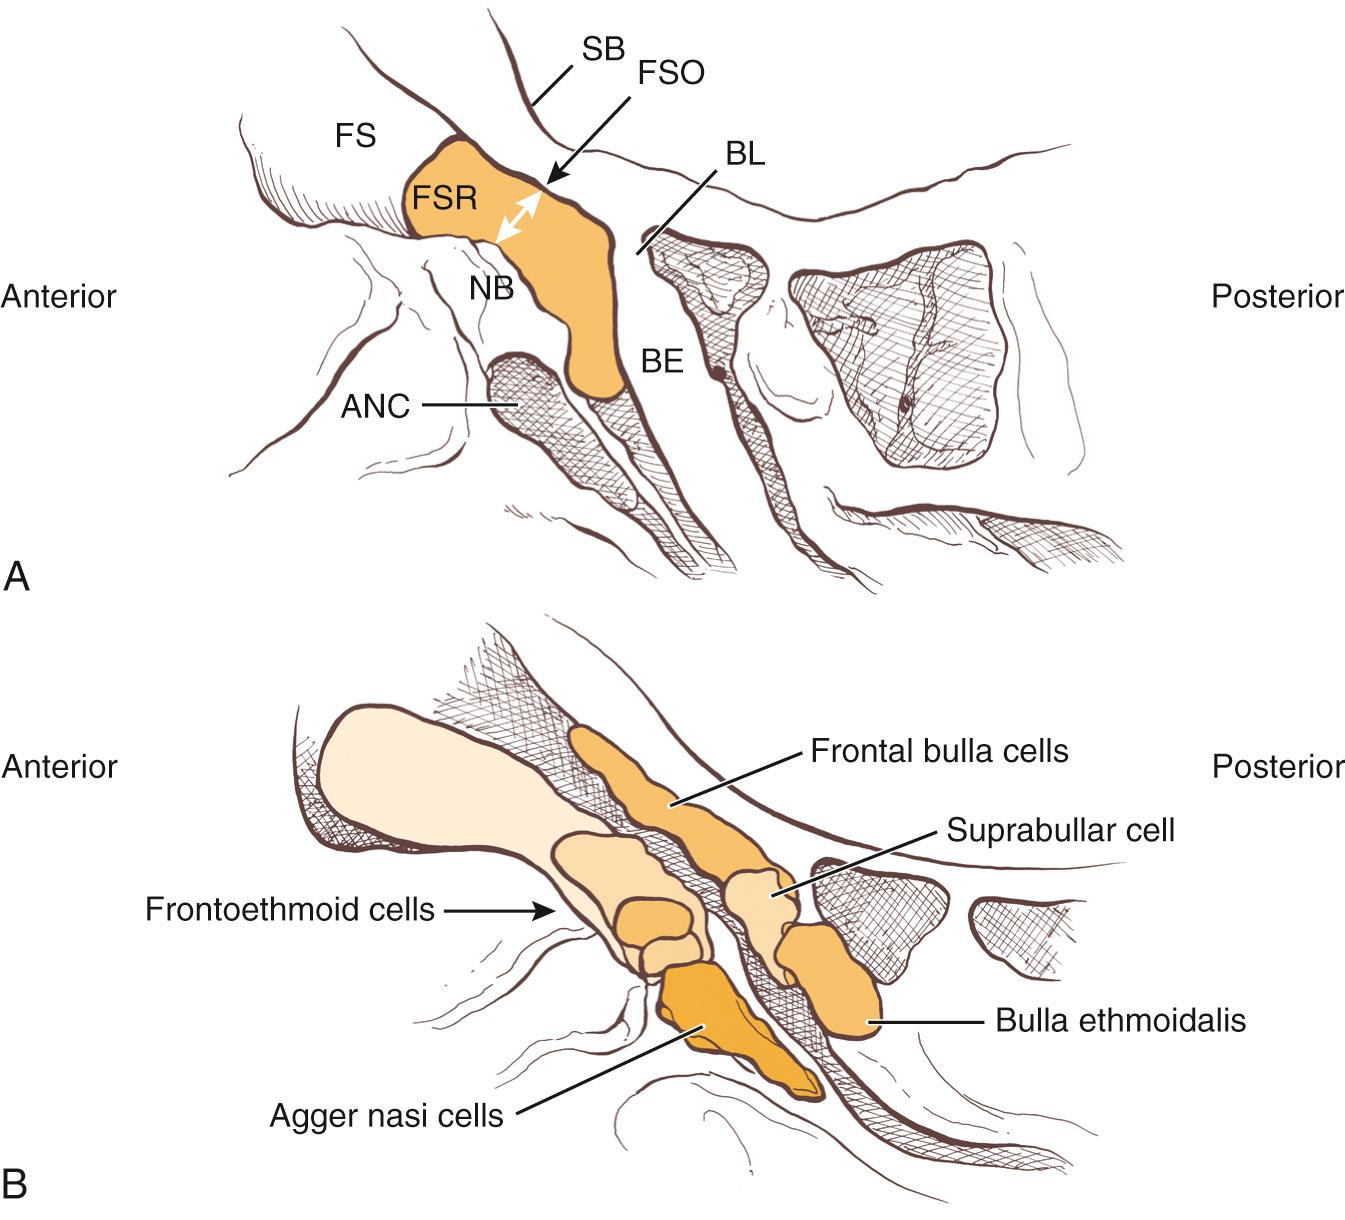 Fig. 44.9, (A) The frontal sinus recess (FSR) is an hourglass-shaped space (shaded area) with the waist at the frontal sinus ostium (FSO) , which is its narrowest part. In the simplest configuration, the boundaries of the frontal recess are limited by the agger nasi cell (ANC) and nasal beak (NB) anteriorly, the bulla ethmoidalis (BE) and the bulla lamella (BL) posteriorly, the anterior skull base (SB) posterosuperiorly, the cribriform plate and middle turbinate medially, and the lamina papyracea laterally. FS, frontal sinus. (B) Frontoethmoidal cells pneumatize around the frontal recess. Frontal cells lie anterior to the frontal recess; suprabullar, supraorbital ethmoidal, and frontobullar cells lie posterior to the frontal recess.